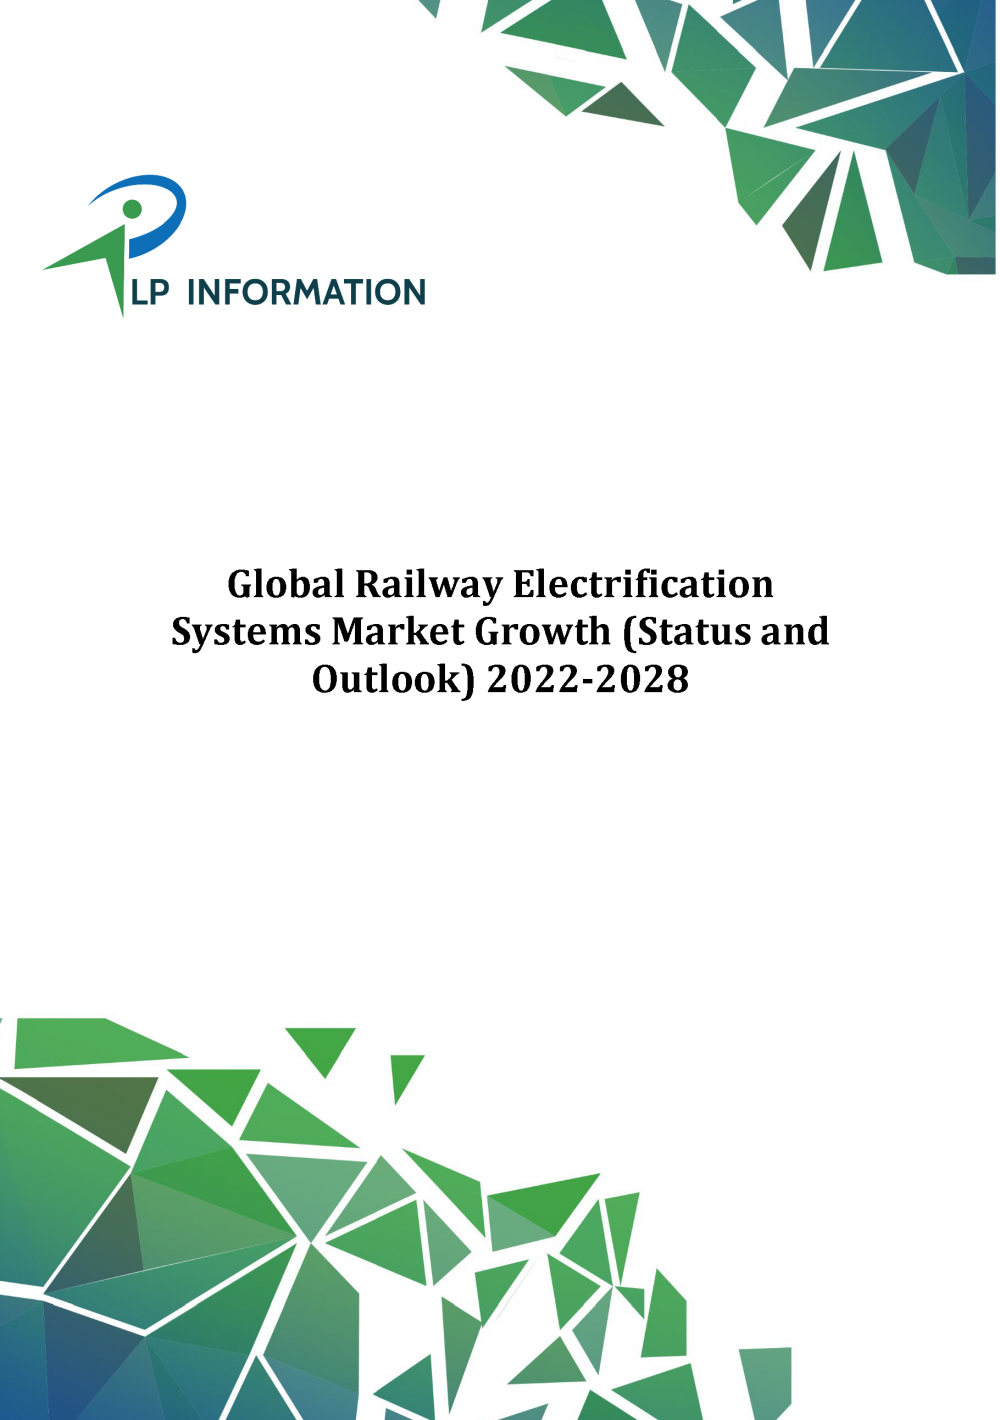 Global Railway Electrification Systems Market Growth (Status and Outlook) 2022-2028_cover